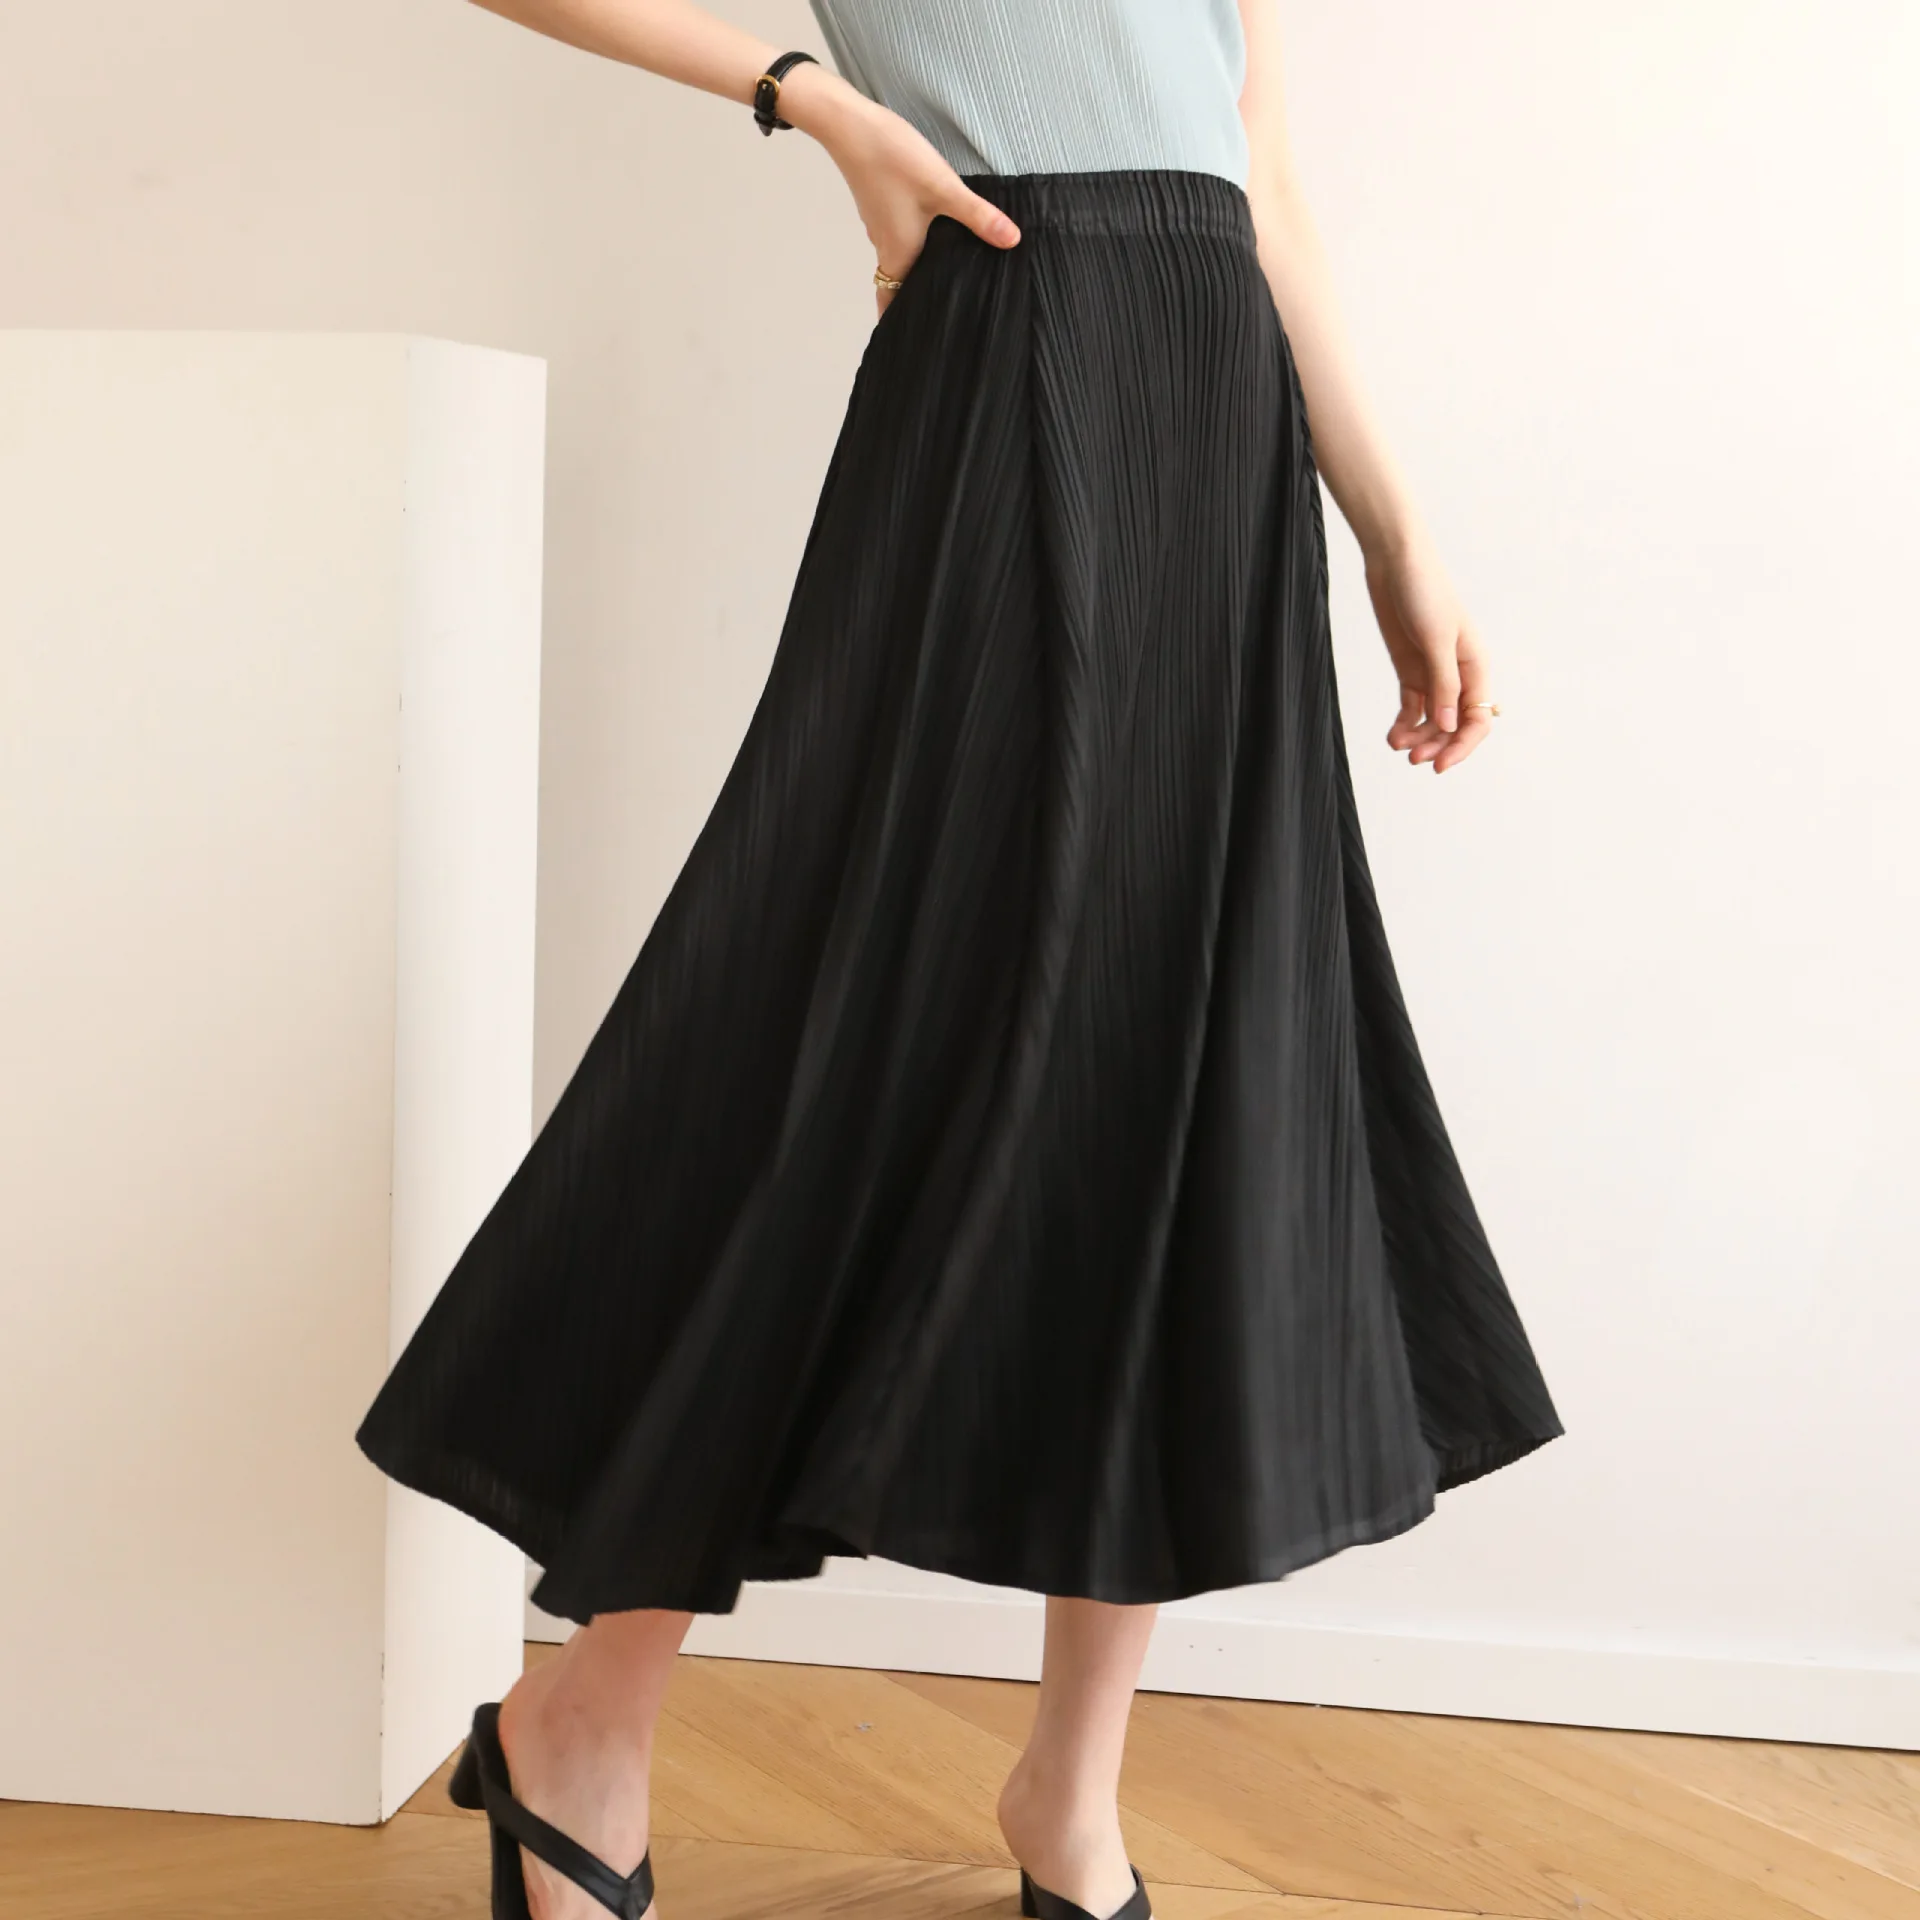 Spring New 2022 Miyake Pleated Ladies Casual Fashion Temperament Commuter High Waist Skirt (Double Layer Fabric)